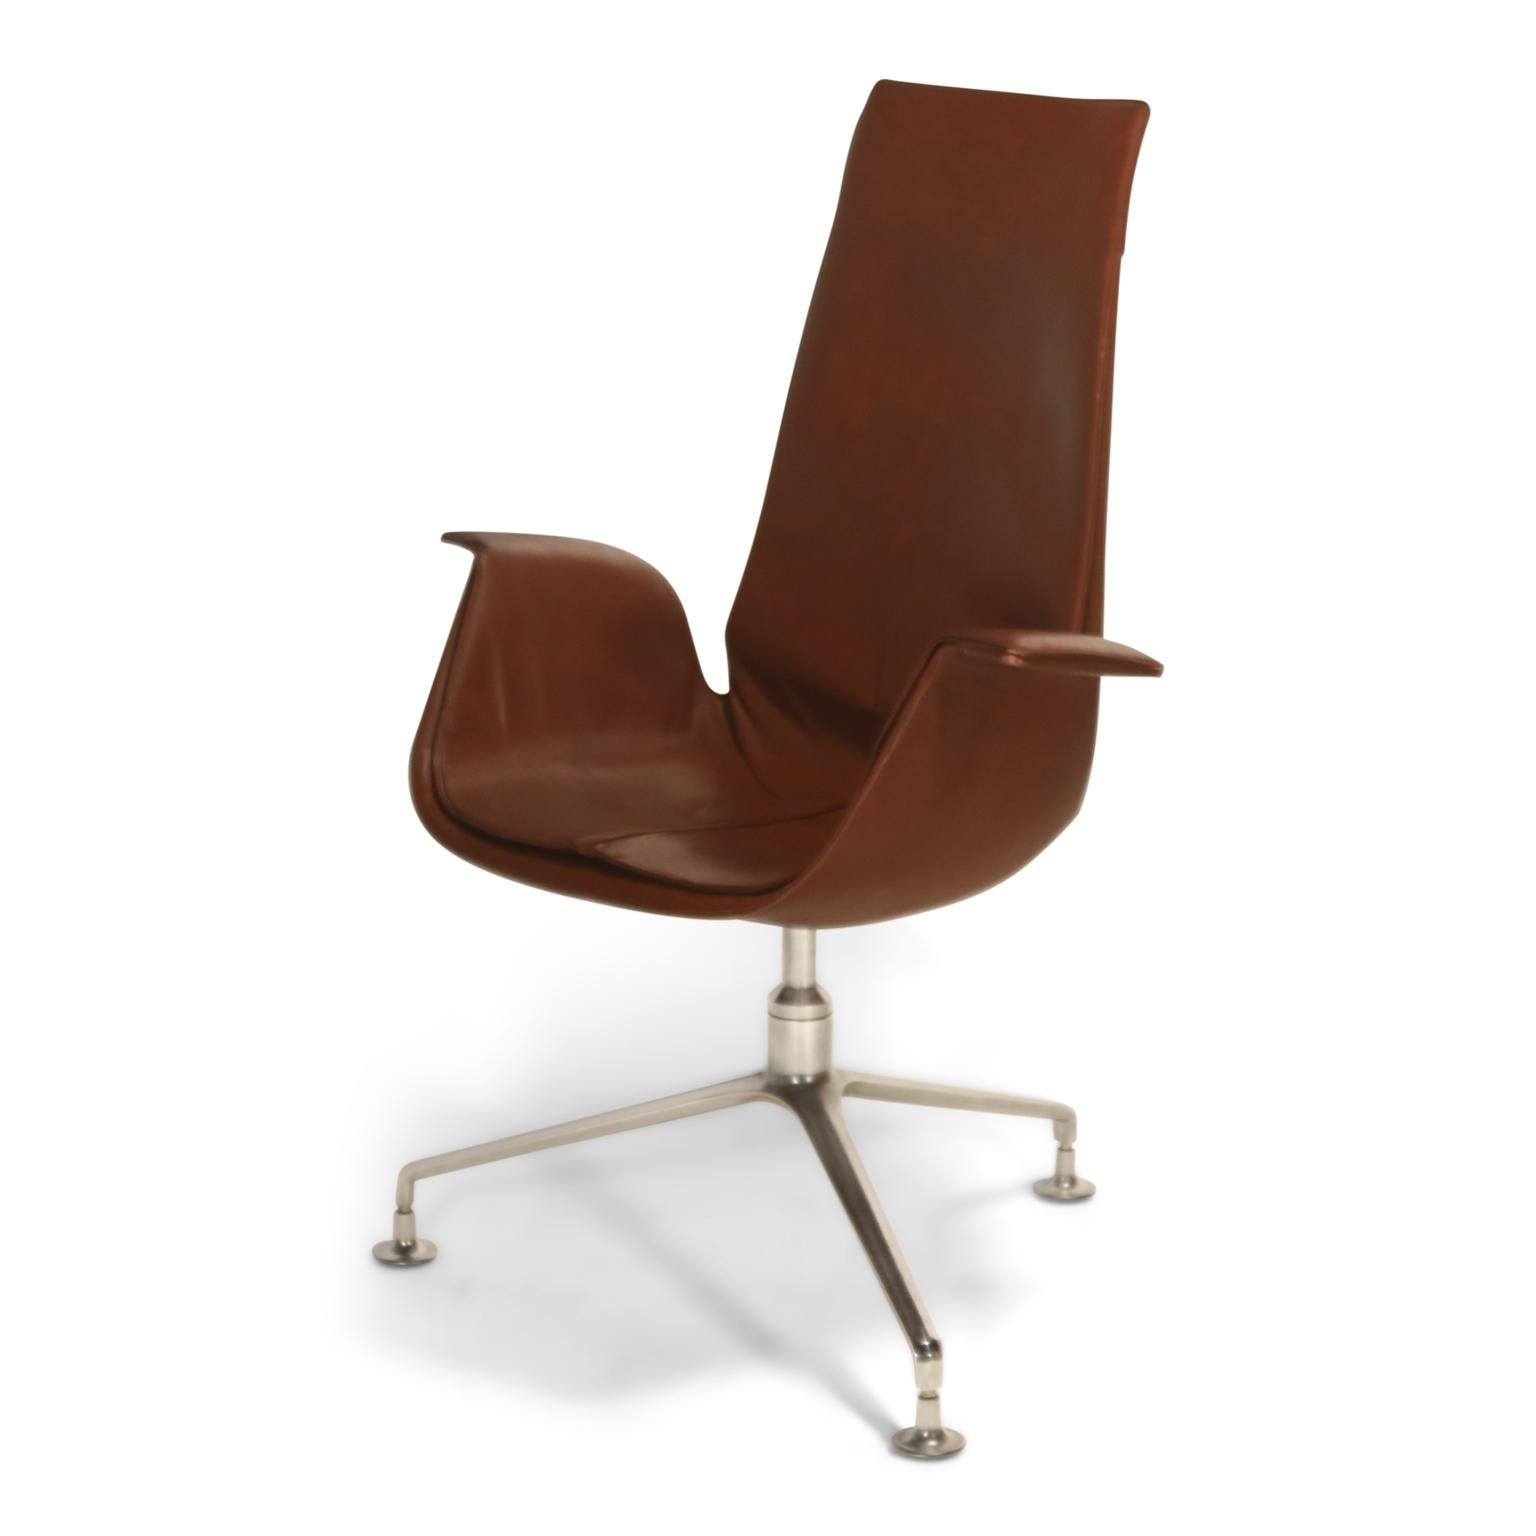 High back (executive) version of the Model FK 6725, leather 'Bird' chair, also commonly referred to as the 'Tulip' chair, designed by Preben Fabricius and Jørgen Kastholm, manufactured in Germany by Alfred Kill International during the 1960s. Chairs